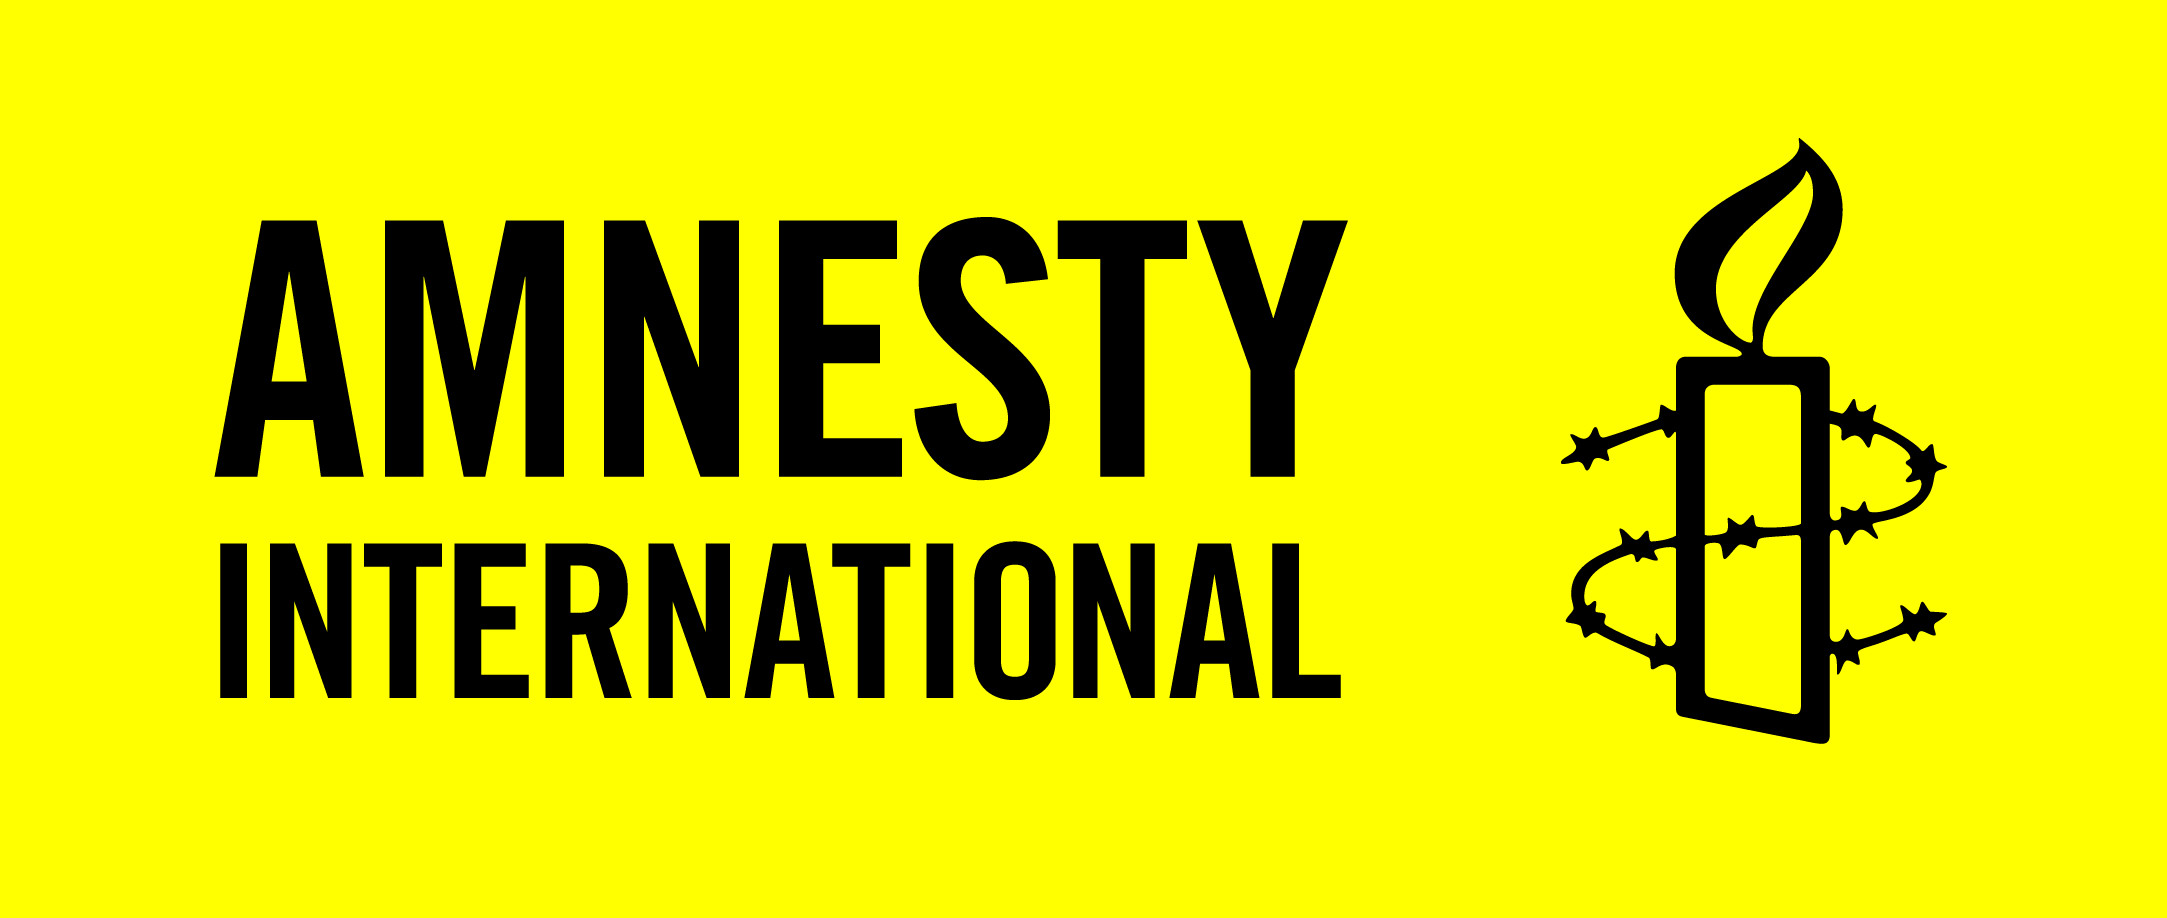 15-facts-about-amnesty-international-day-may-28th